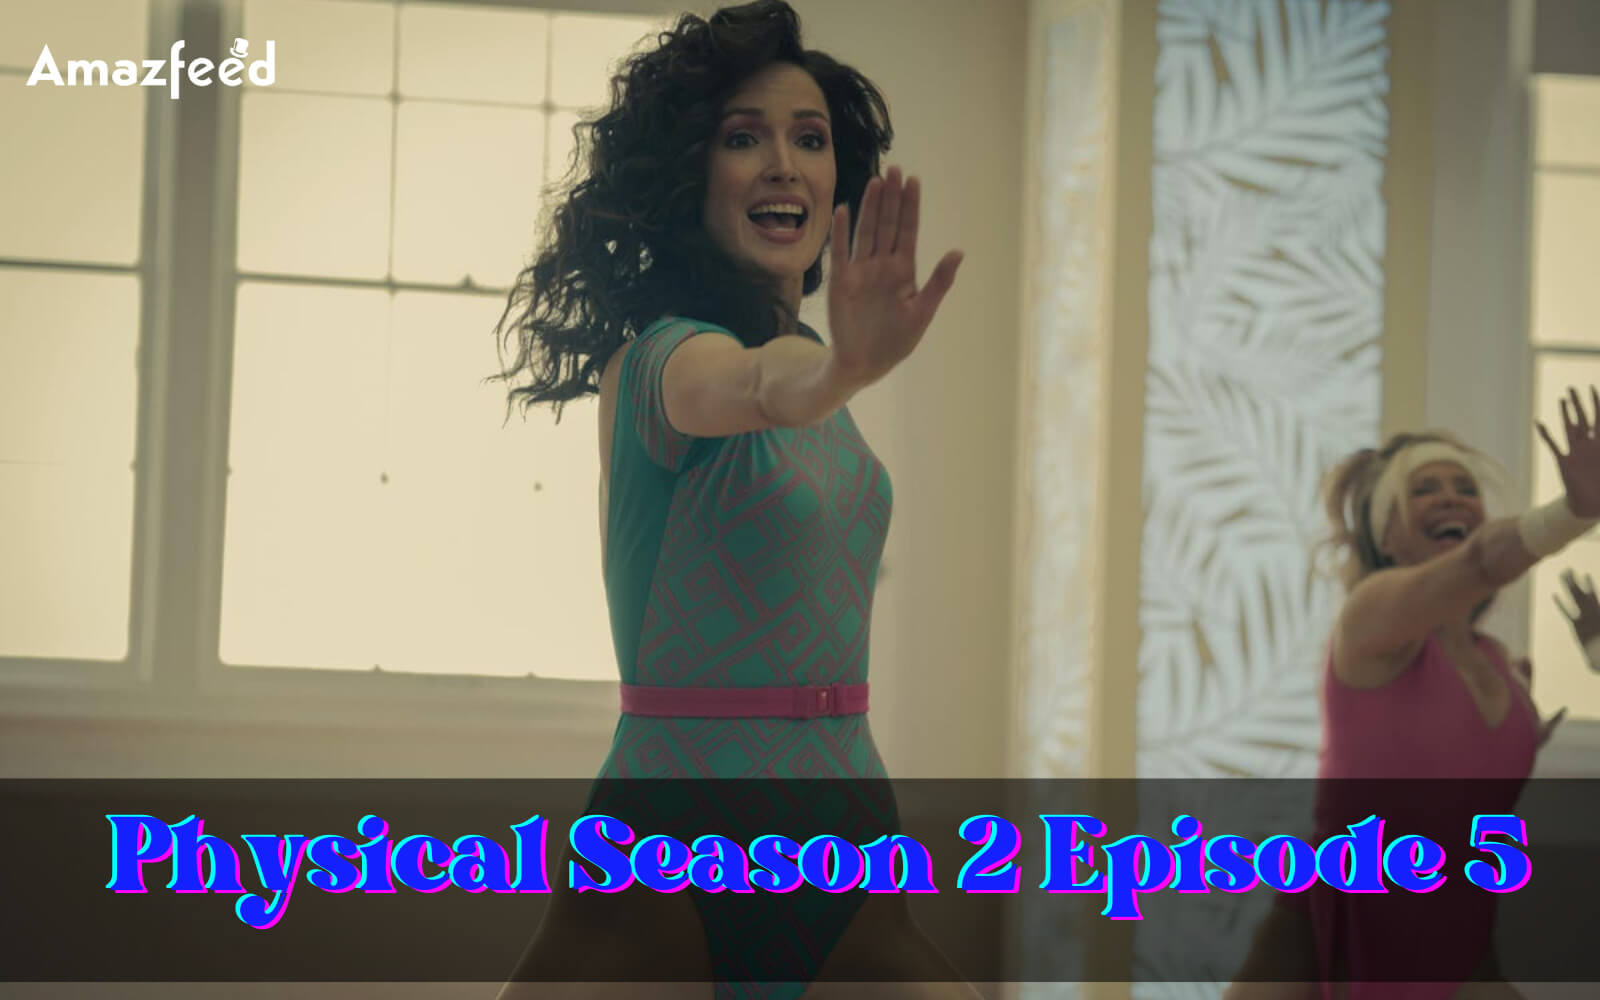 Physical Season 2 Episode 5 release date